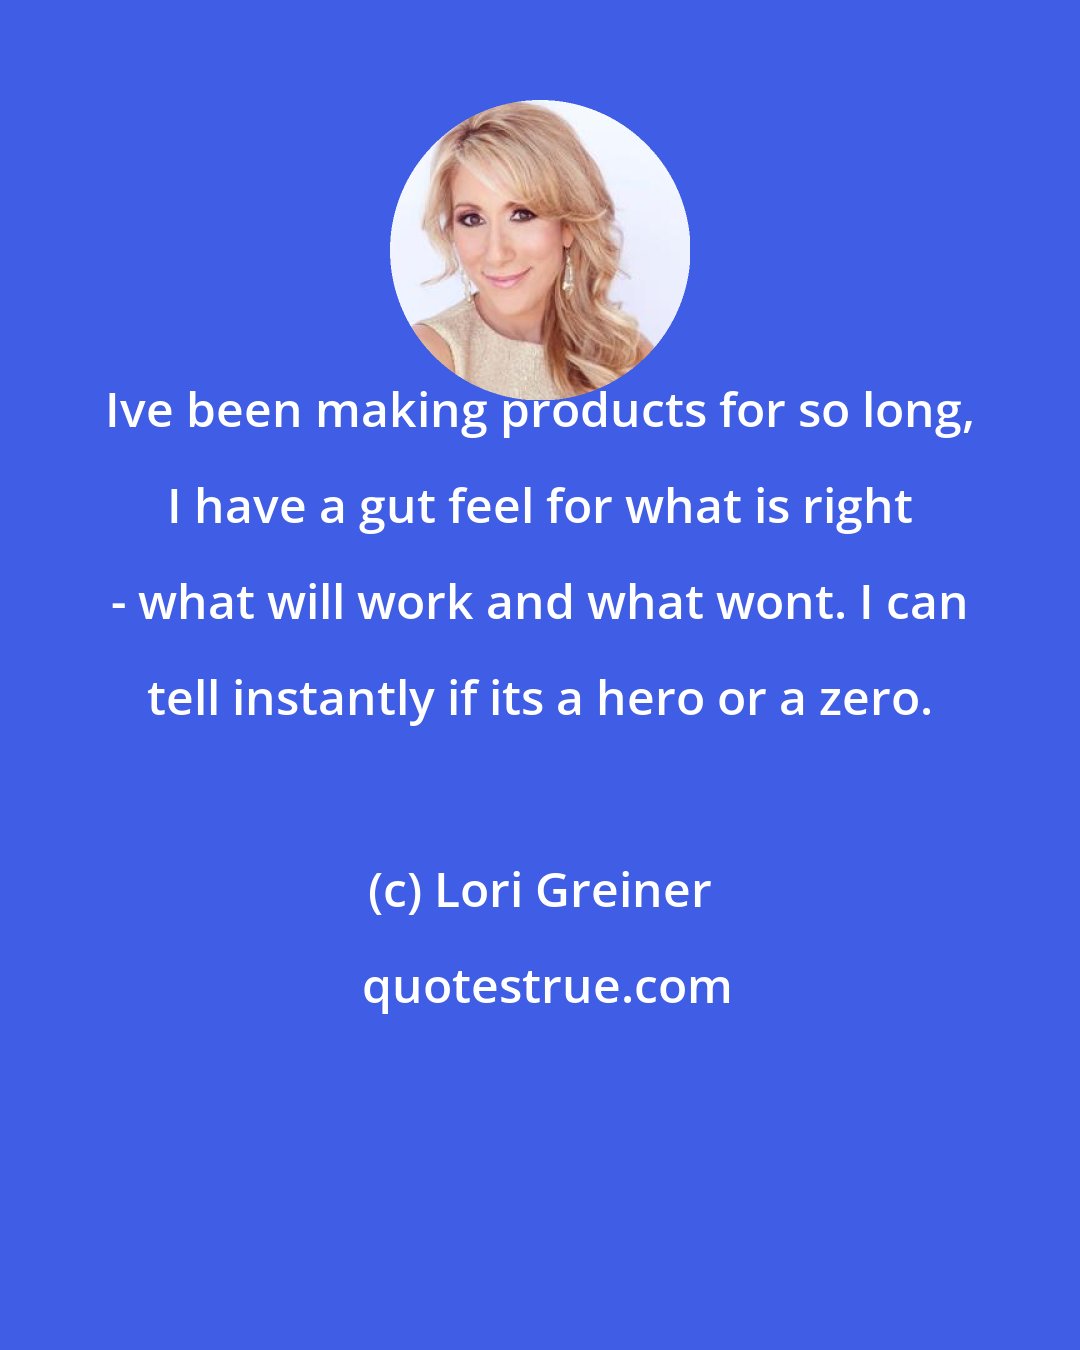 Lori Greiner: Ive been making products for so long, I have a gut feel for what is right - what will work and what wont. I can tell instantly if its a hero or a zero.